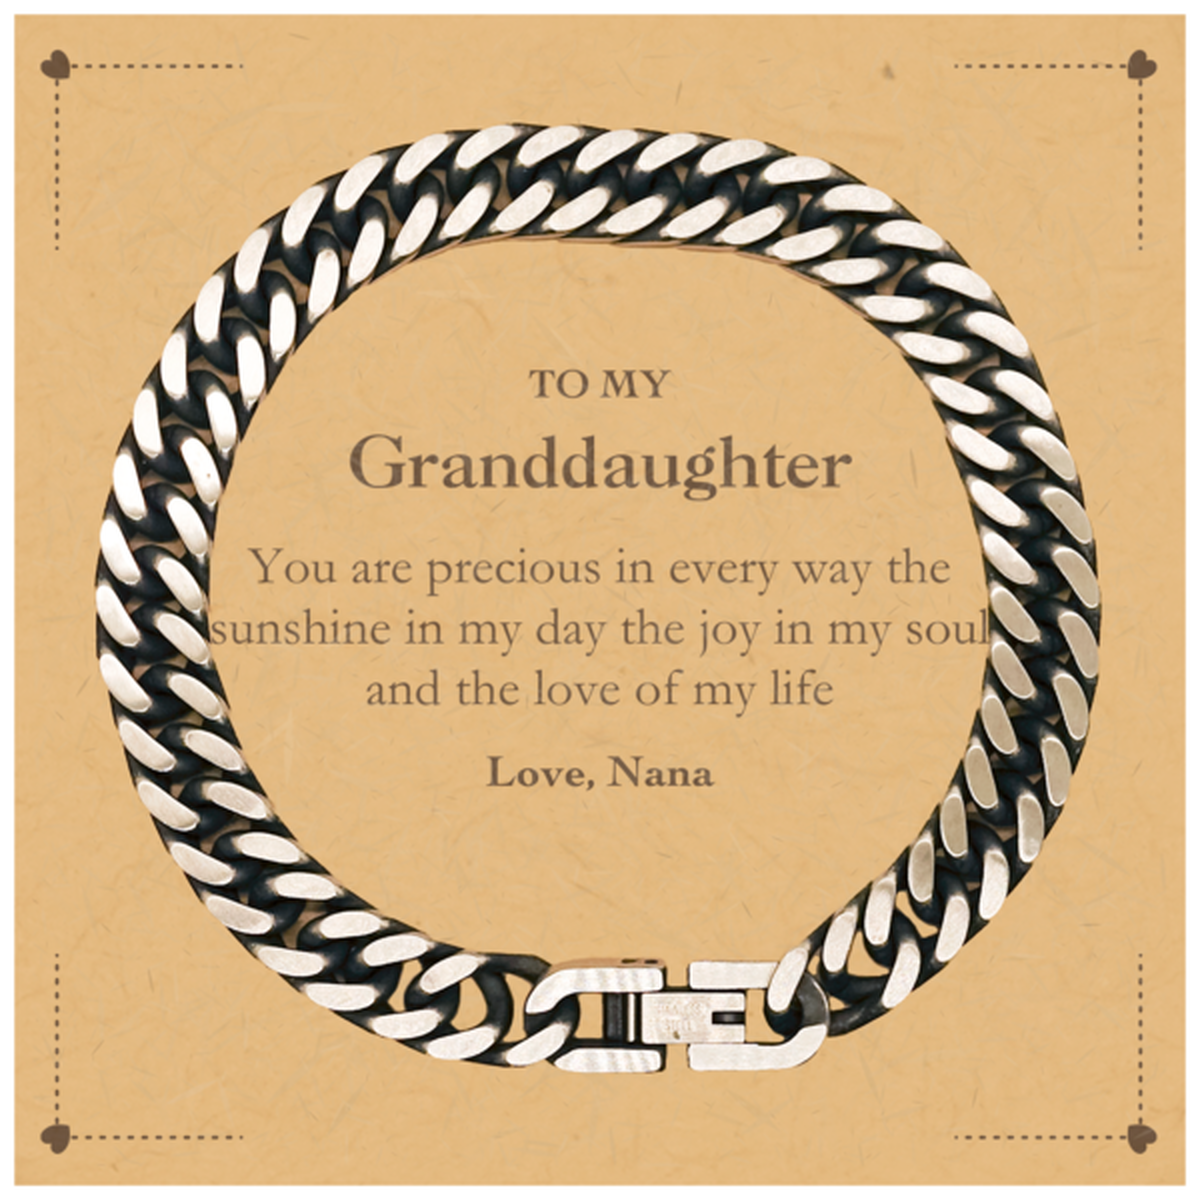 Graduation Gifts for Granddaughter Cuban Link Chain Bracelet Present from Nana, Christmas Granddaughter Birthday Gifts Granddaughter You are precious in every way the sunshine in my day. Love, Nana